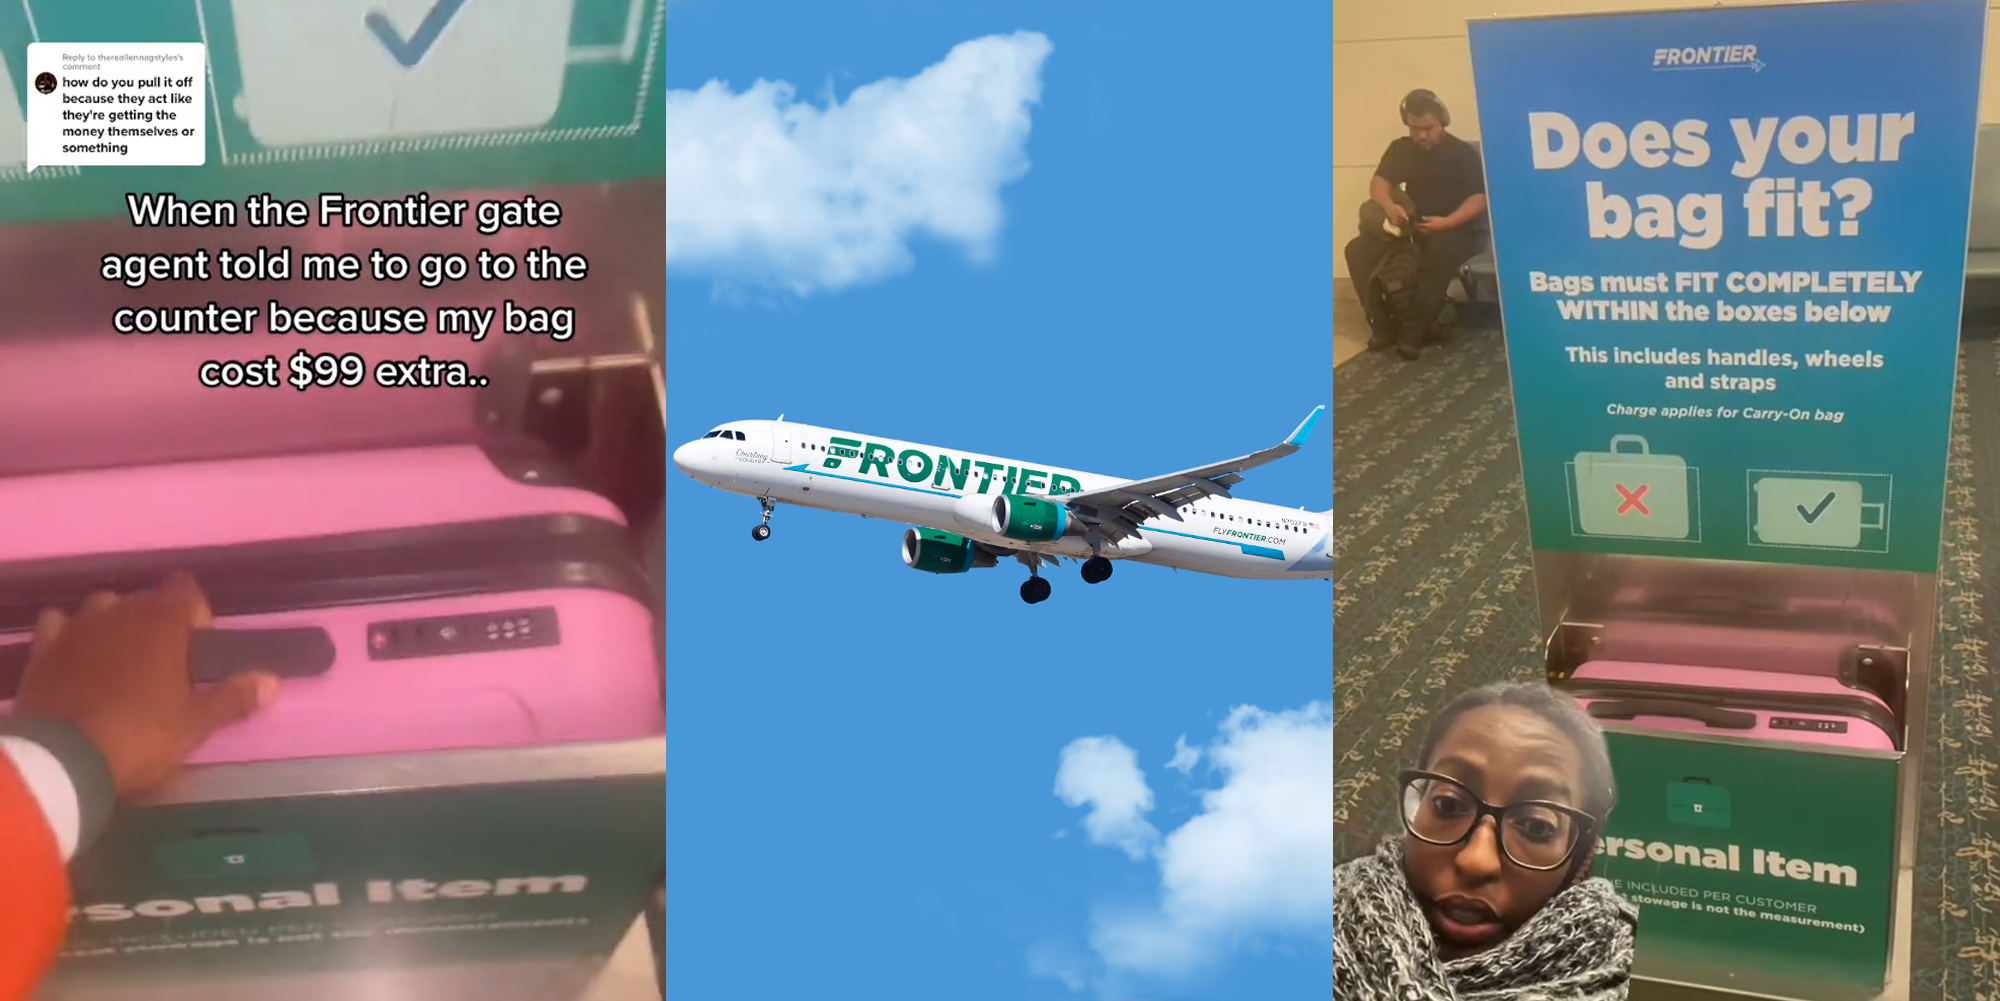 Pack small or pay up Frontier is cracking down on carryon baggage  The  Points Guy